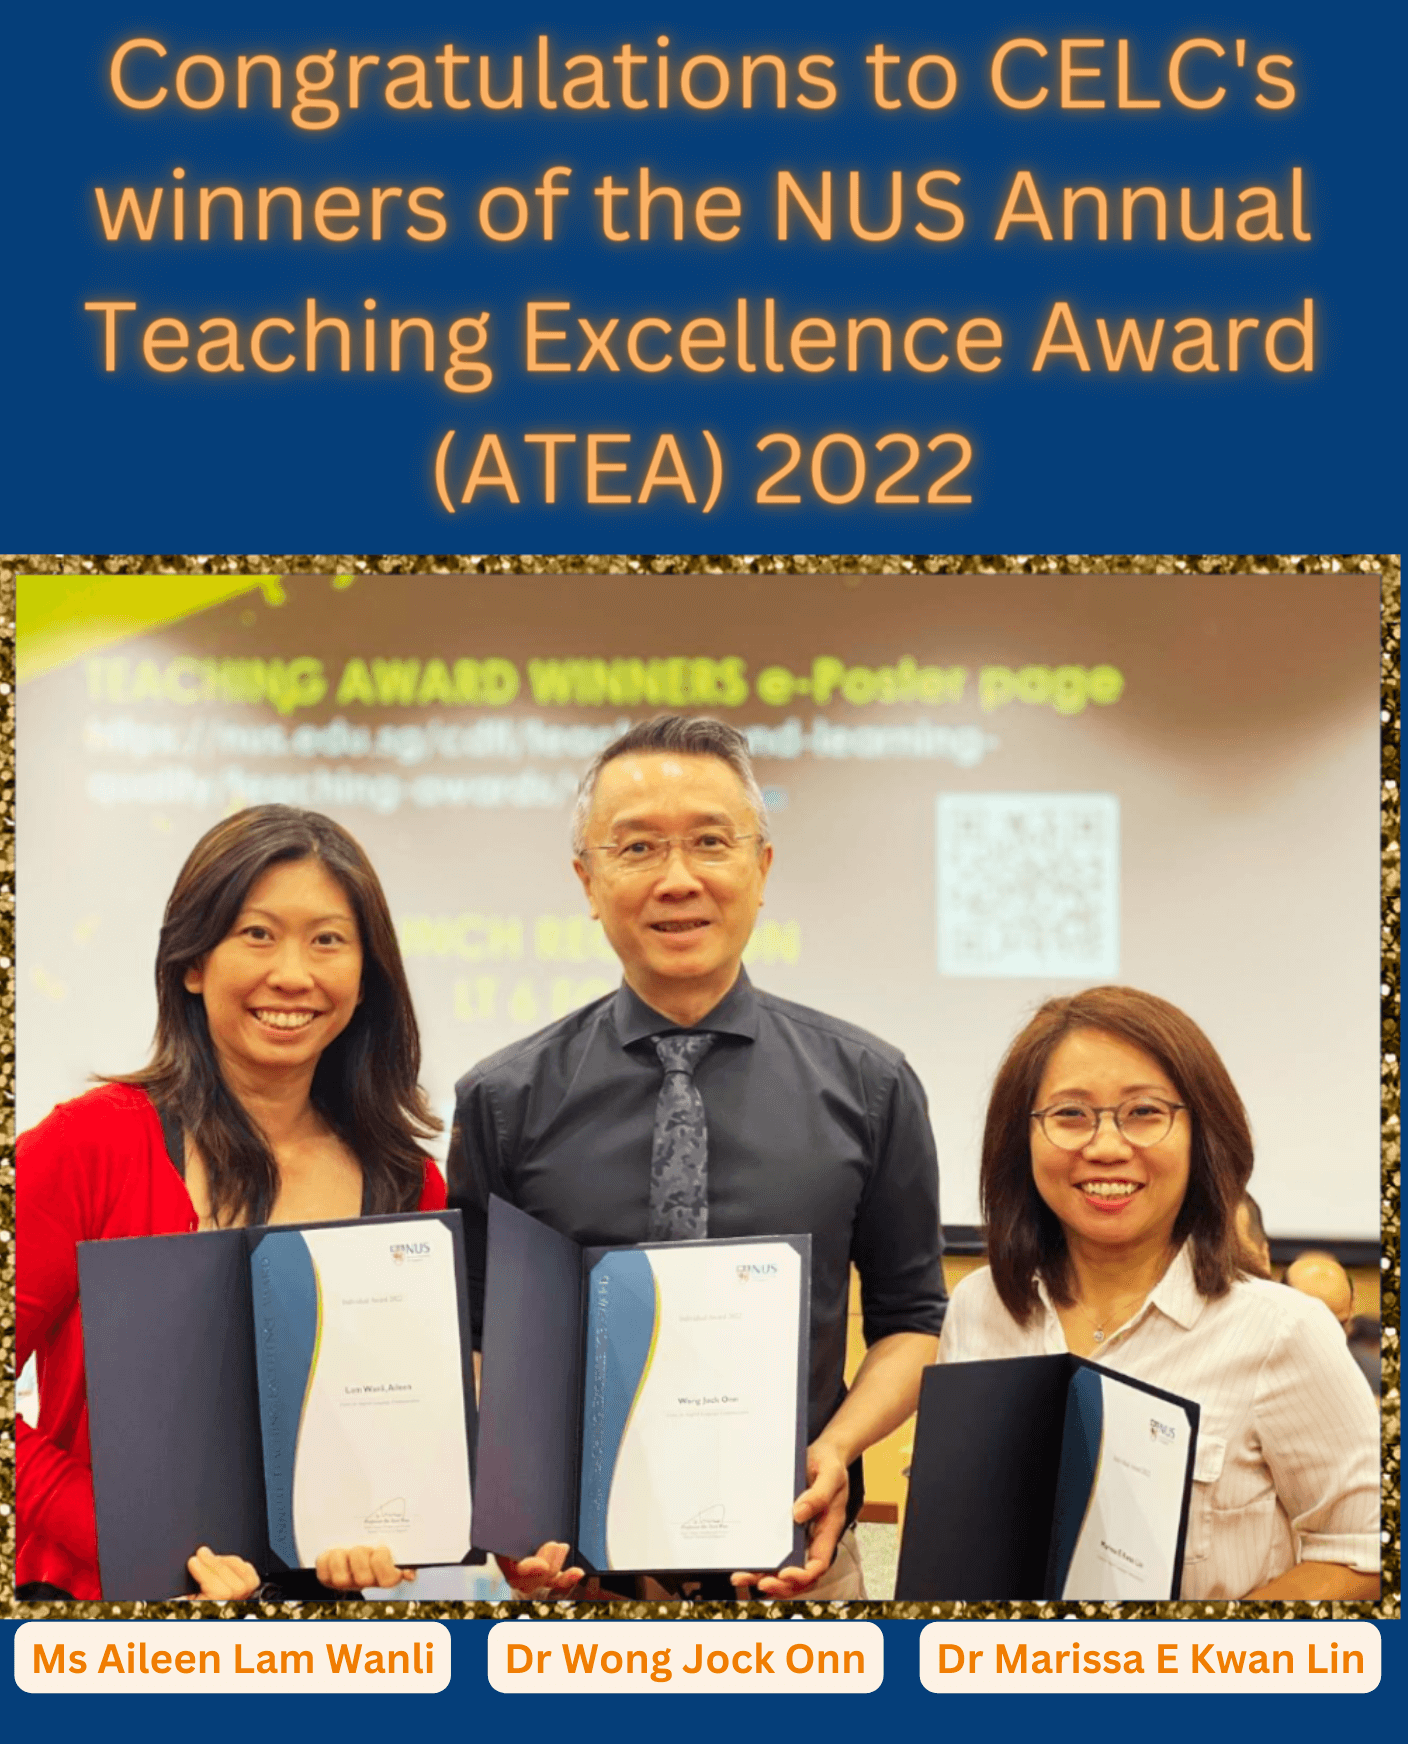 Congratulations to CELC's winners of the NUS Annual Teaching Excellence Award (ATEA) 2022